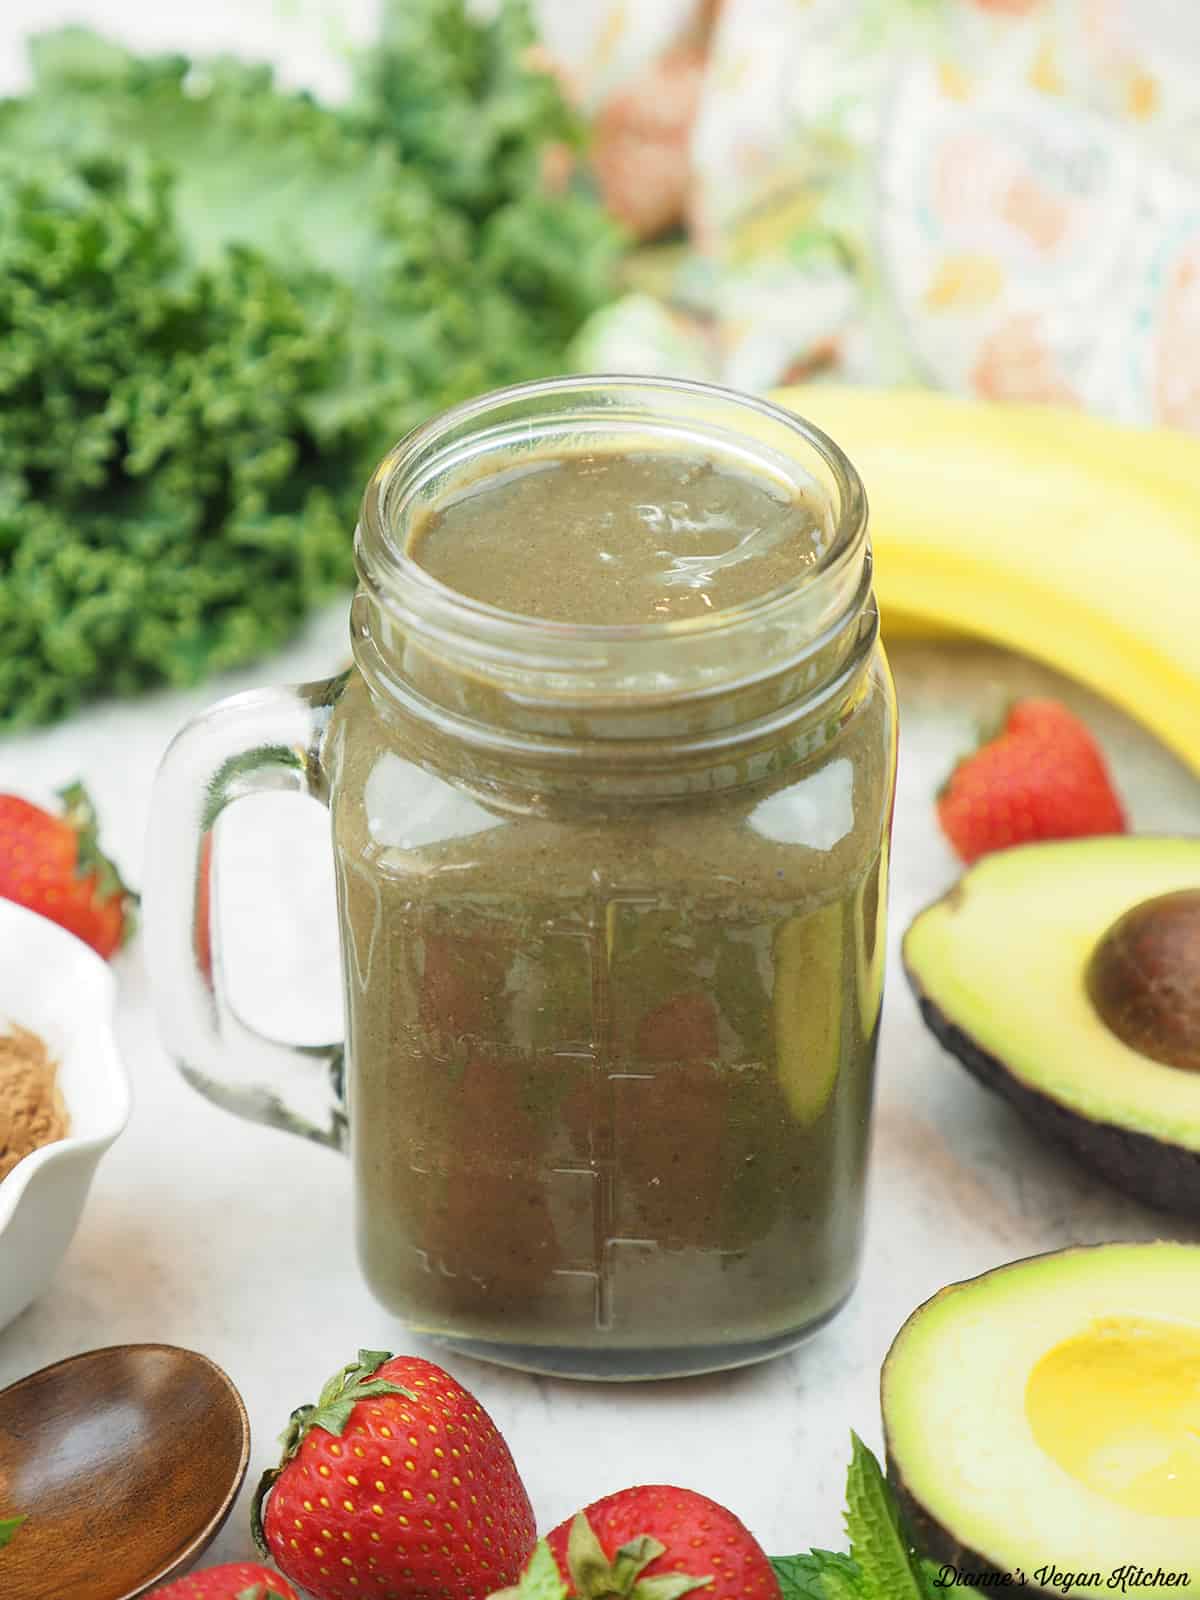 a chocolate shake surrounded by kale, an avocado, strawberries, bananas, and a bowl of cocoa powder